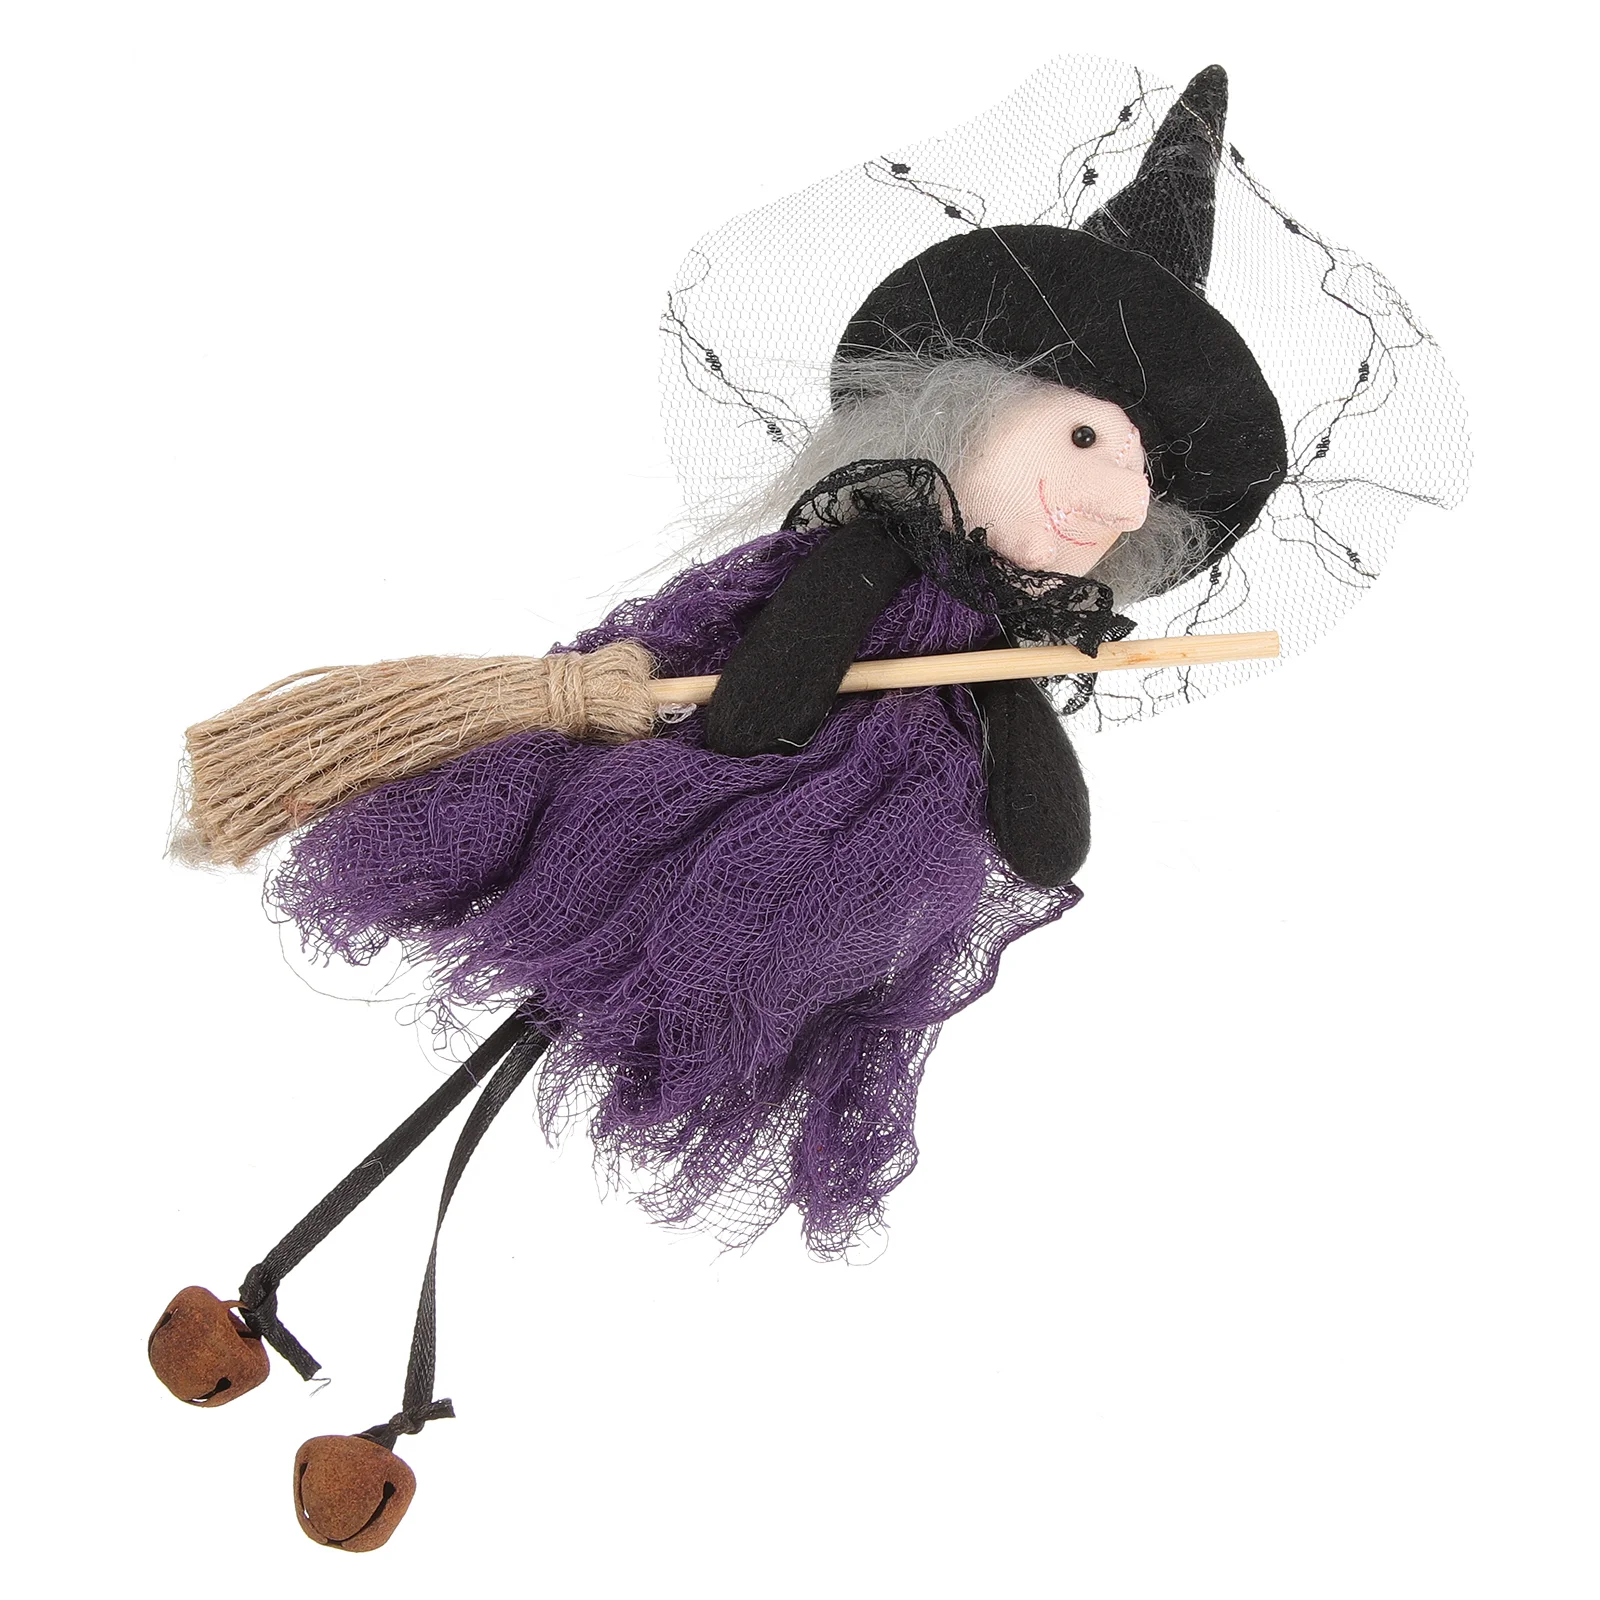 

Home Decoration Witch Suspending Figurine Halloween Accessory Festival Broom Adorable Household